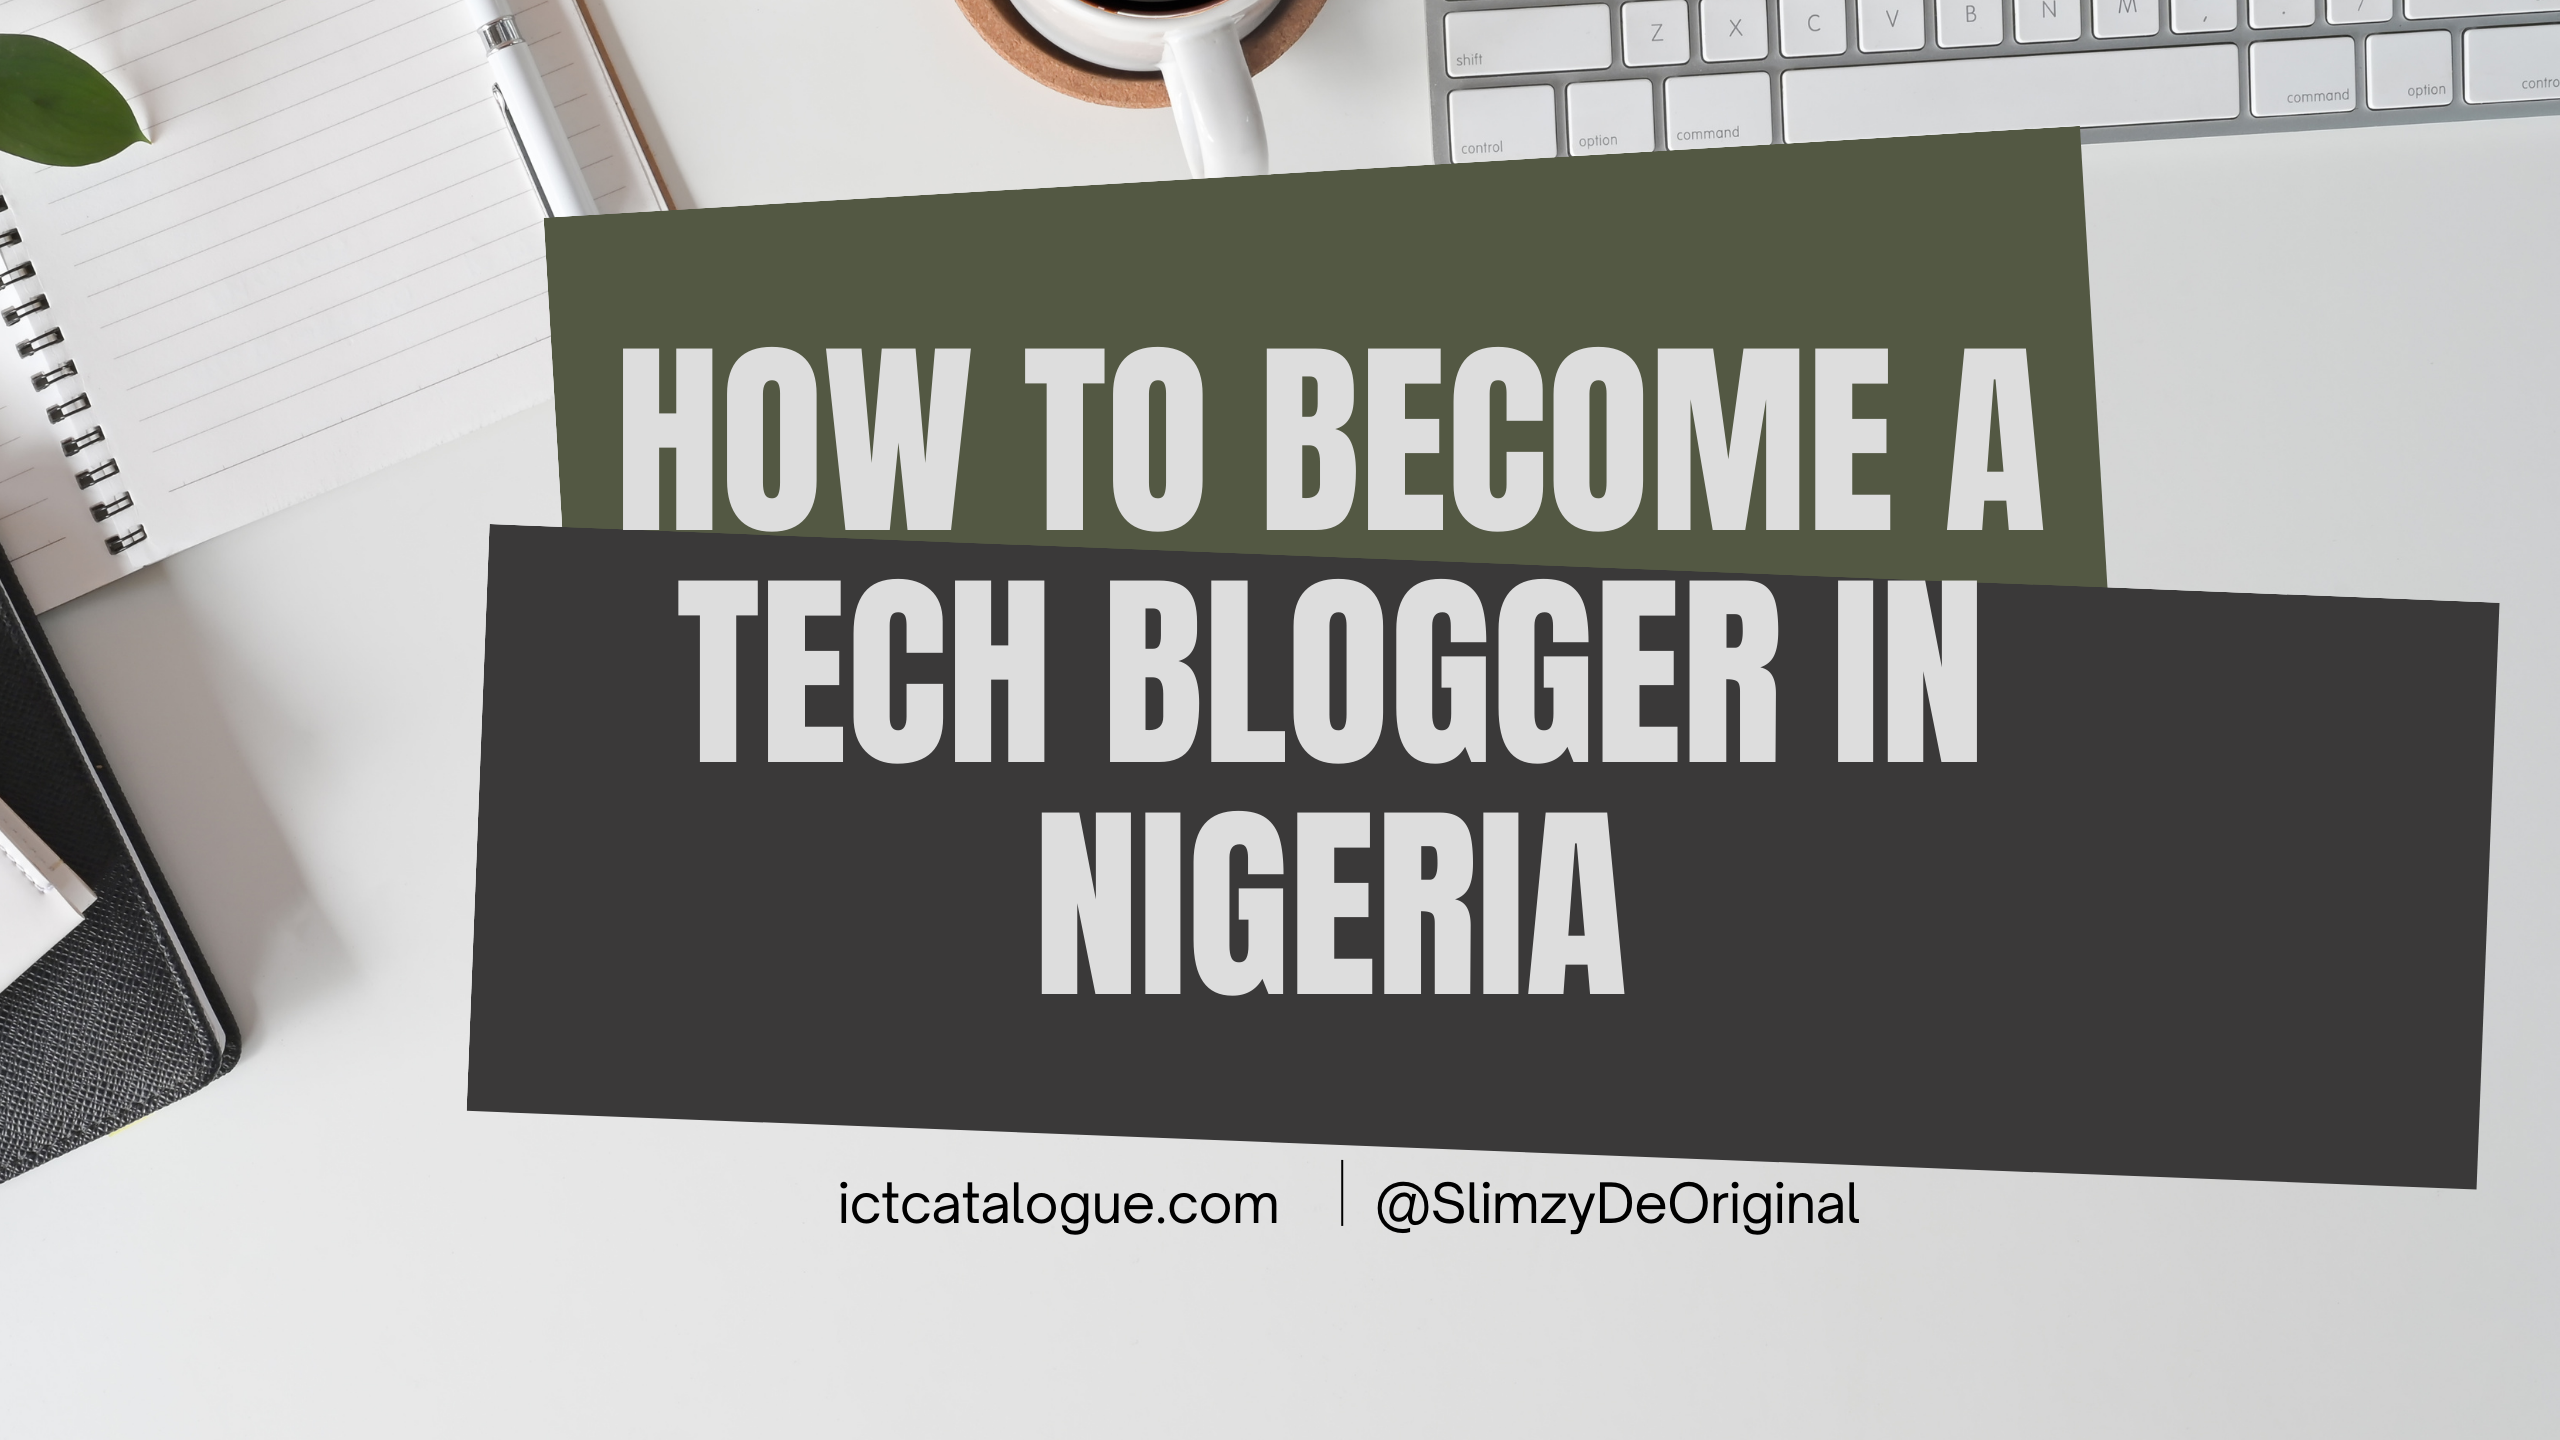 How to Become a Tech Blogger in Nigeria